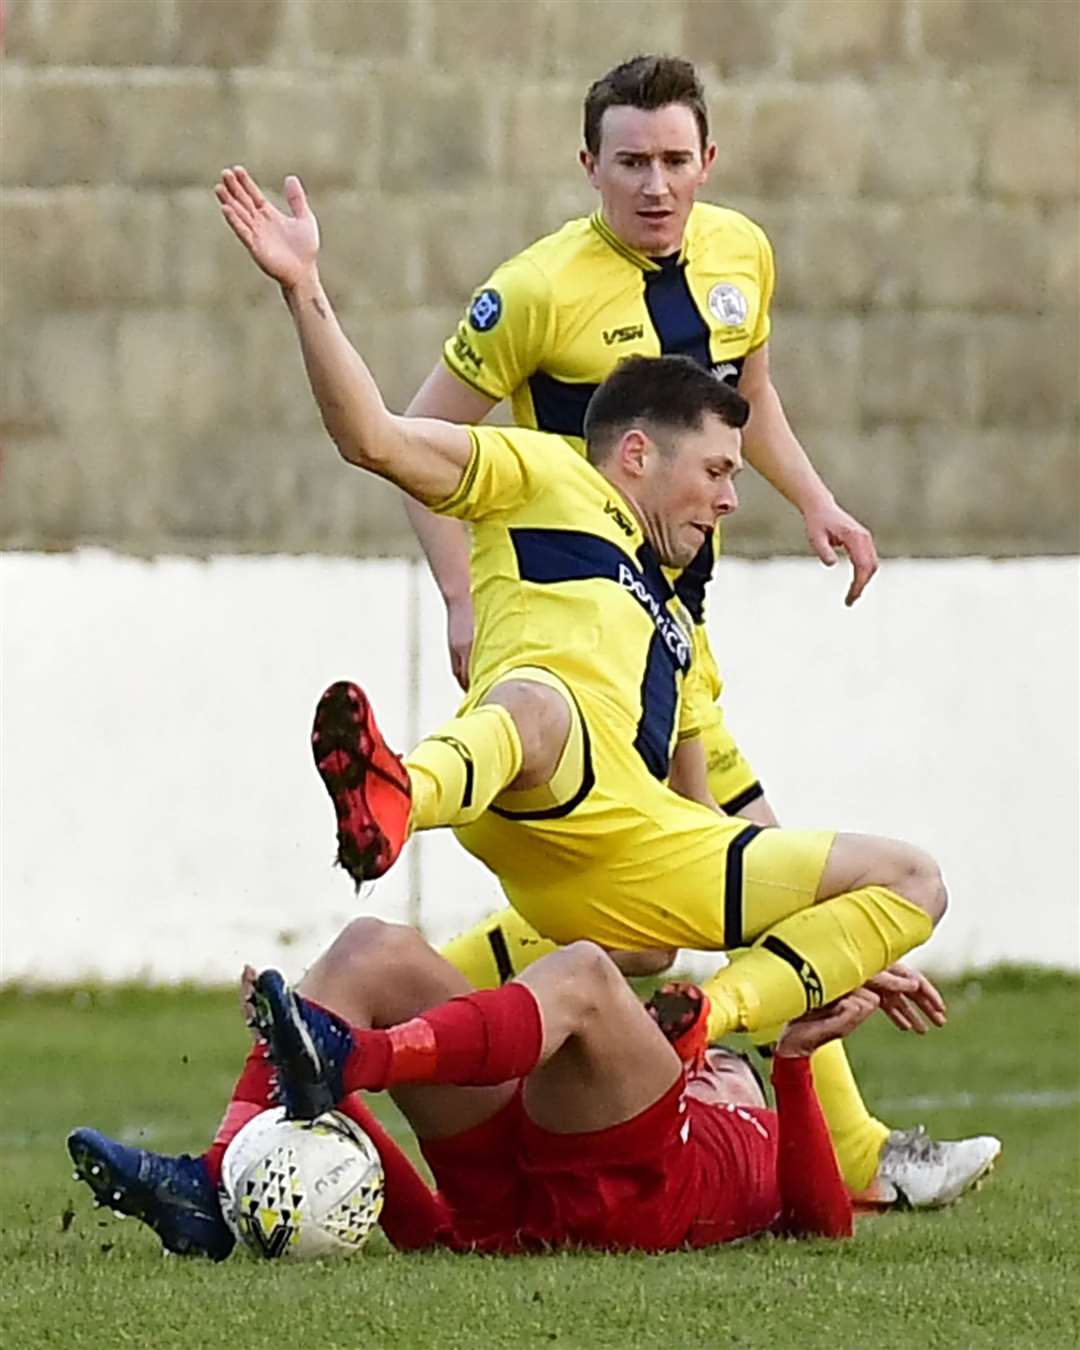 Wick Academy's Jack Henry takes a tumble during the Scorries' 2-0 win at Lossiemouth last week. Tom McKenna's side host Nairn County on Saturday and hope to give the fans more to cheer about. Picture: Mel Roger